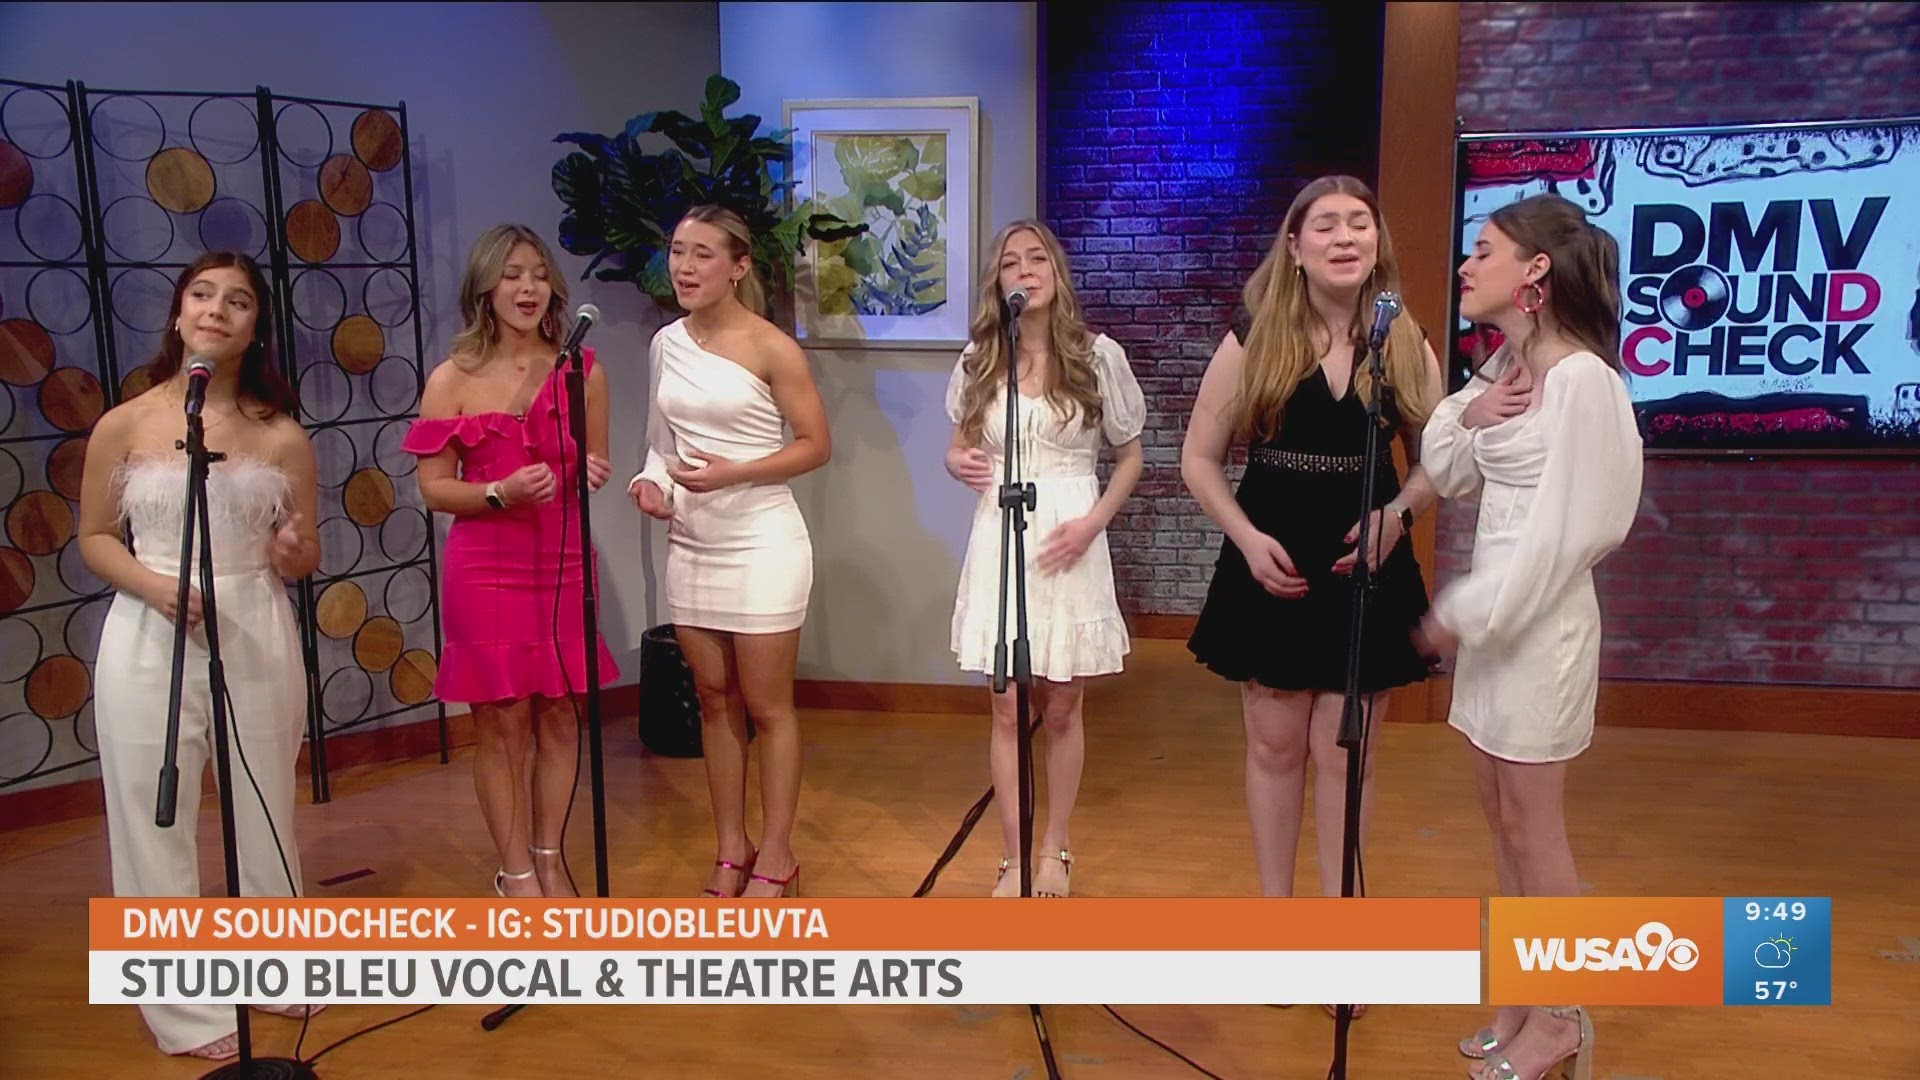 Tina Smothers and Madison Whitbeck introduce the Bleu Girls of Studio Bleu Vocal & Theatre Arts who perform their original song called "Pieces to Begin".